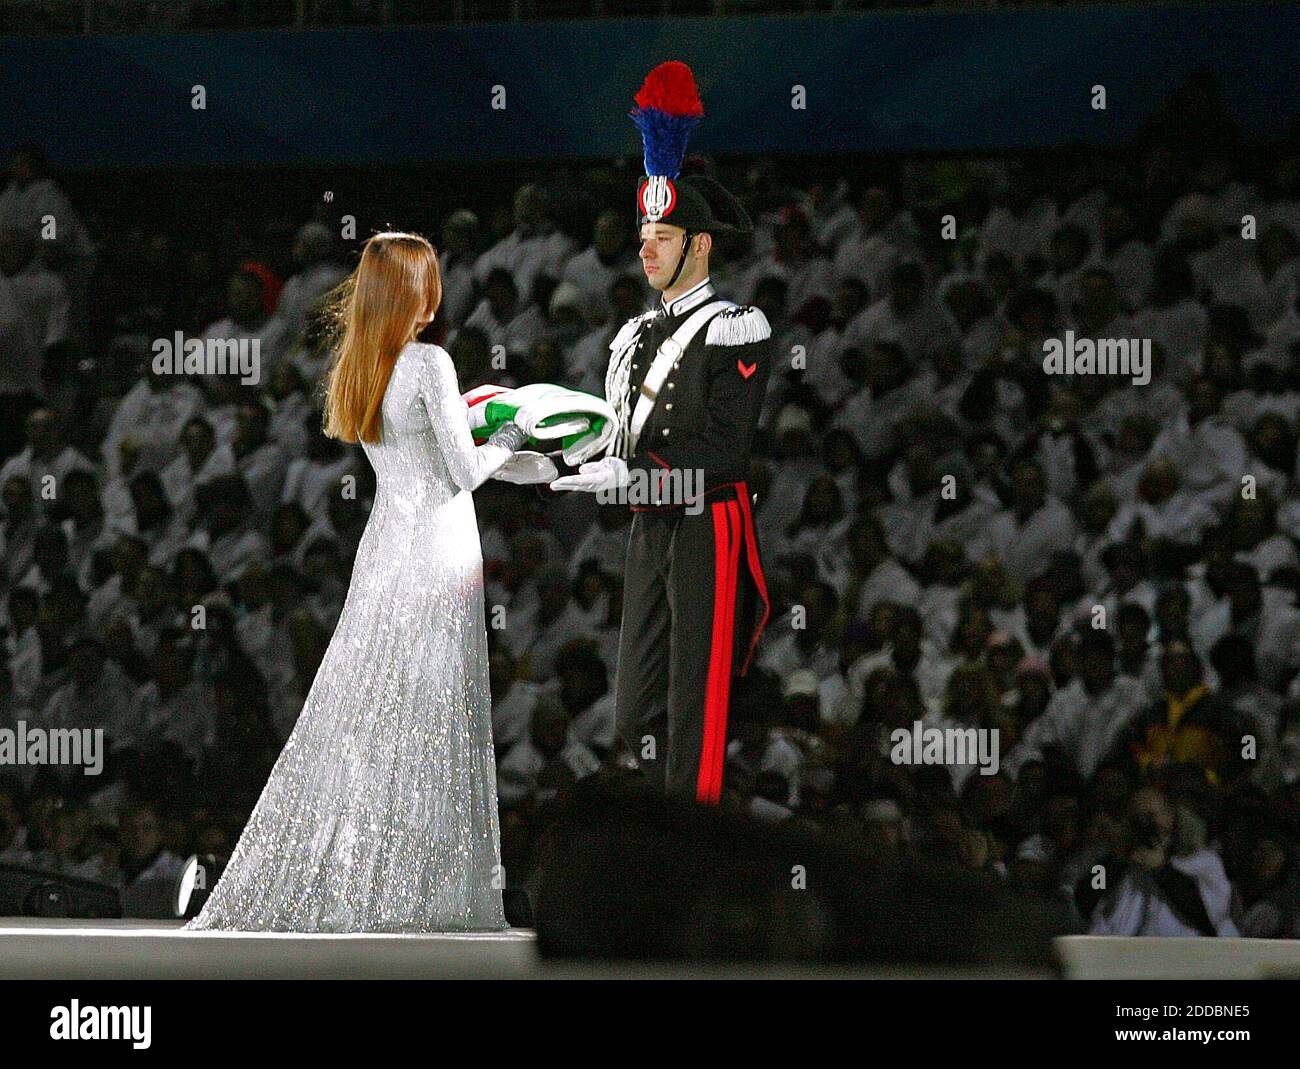 NO FILM, NO VIDEO, NO TV, NO DOCUMENTARY - Turin born former supermodel Carla Bruni carries the Italian flag to a member of the Honour Guard of the Carabinieri, a military corps founded in Turin, during the Opening ceremony of the XX Olympic Games in Turin, Italy on February 10, 2006. The XX Olympic Winter Games run from Friday, February 10 to February 26, 2006. Photo by Barbara Johnston/Philadelphia Inquirer/KRT/Cameleon/ABACAPRESS.COM Stock Photo